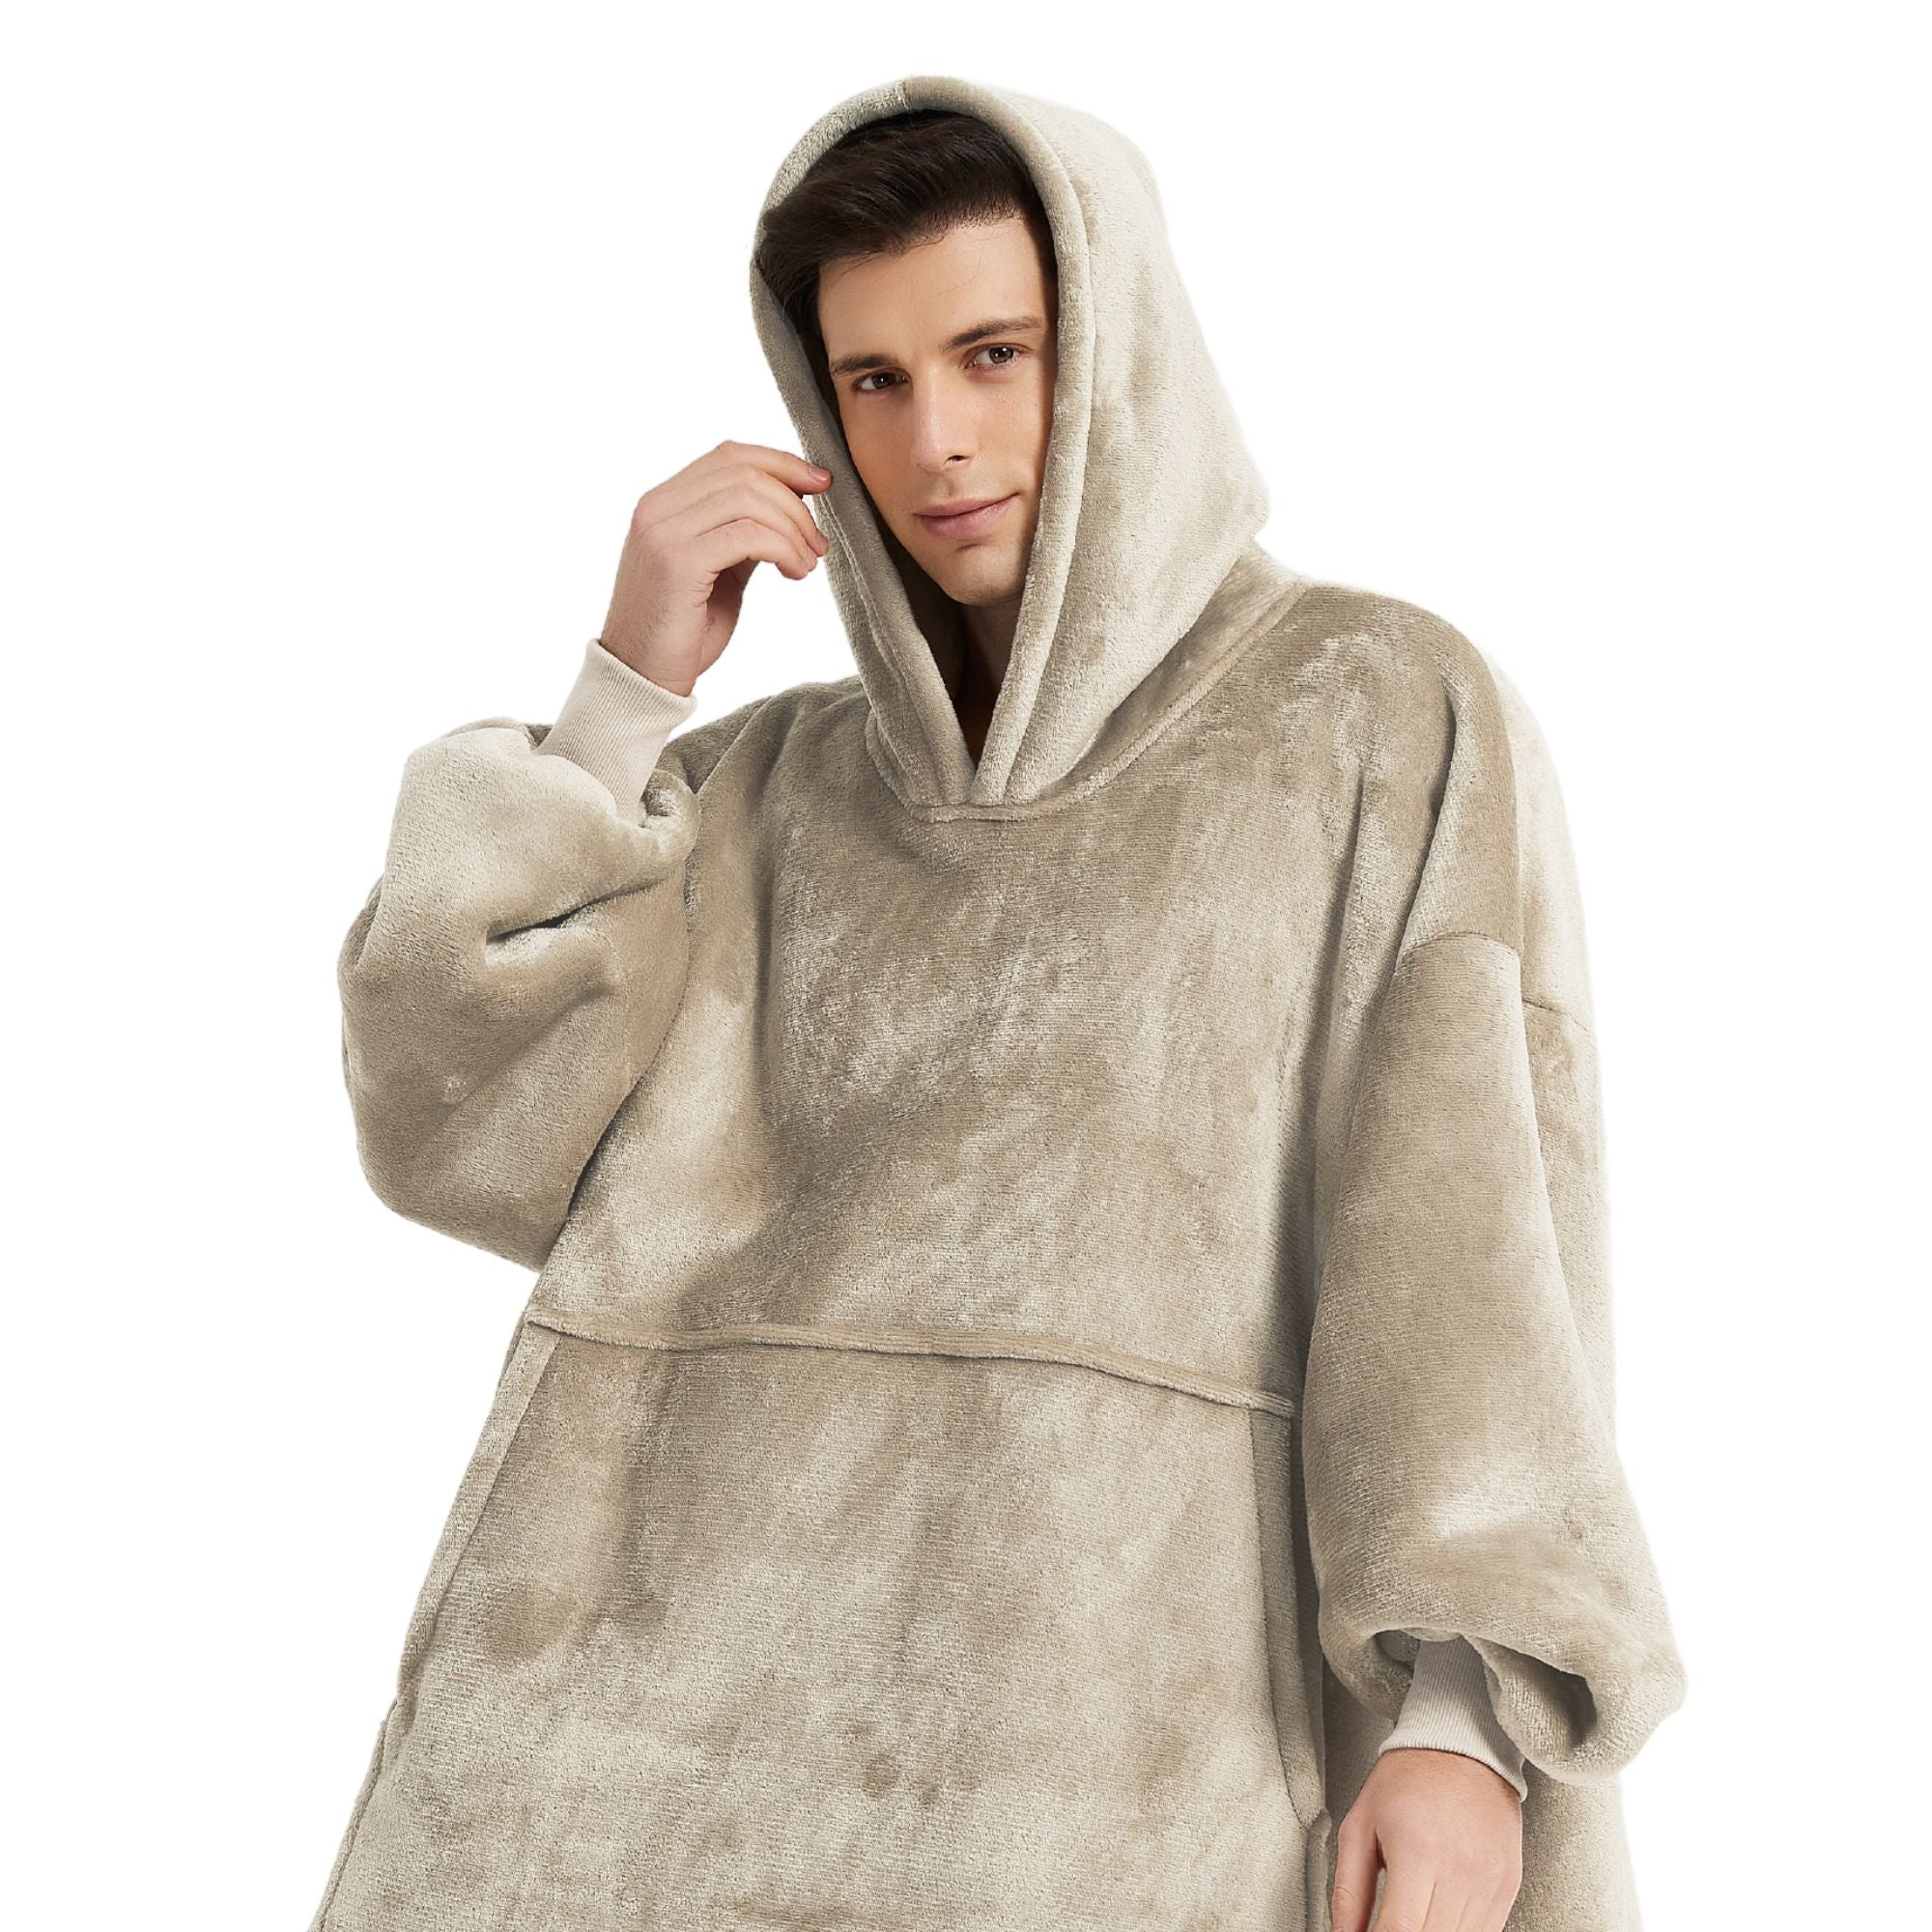 Pull Plaid Homme Beige Sweat Polaire Géant doublure polaire sherpa hiver The Oversized Hoodie